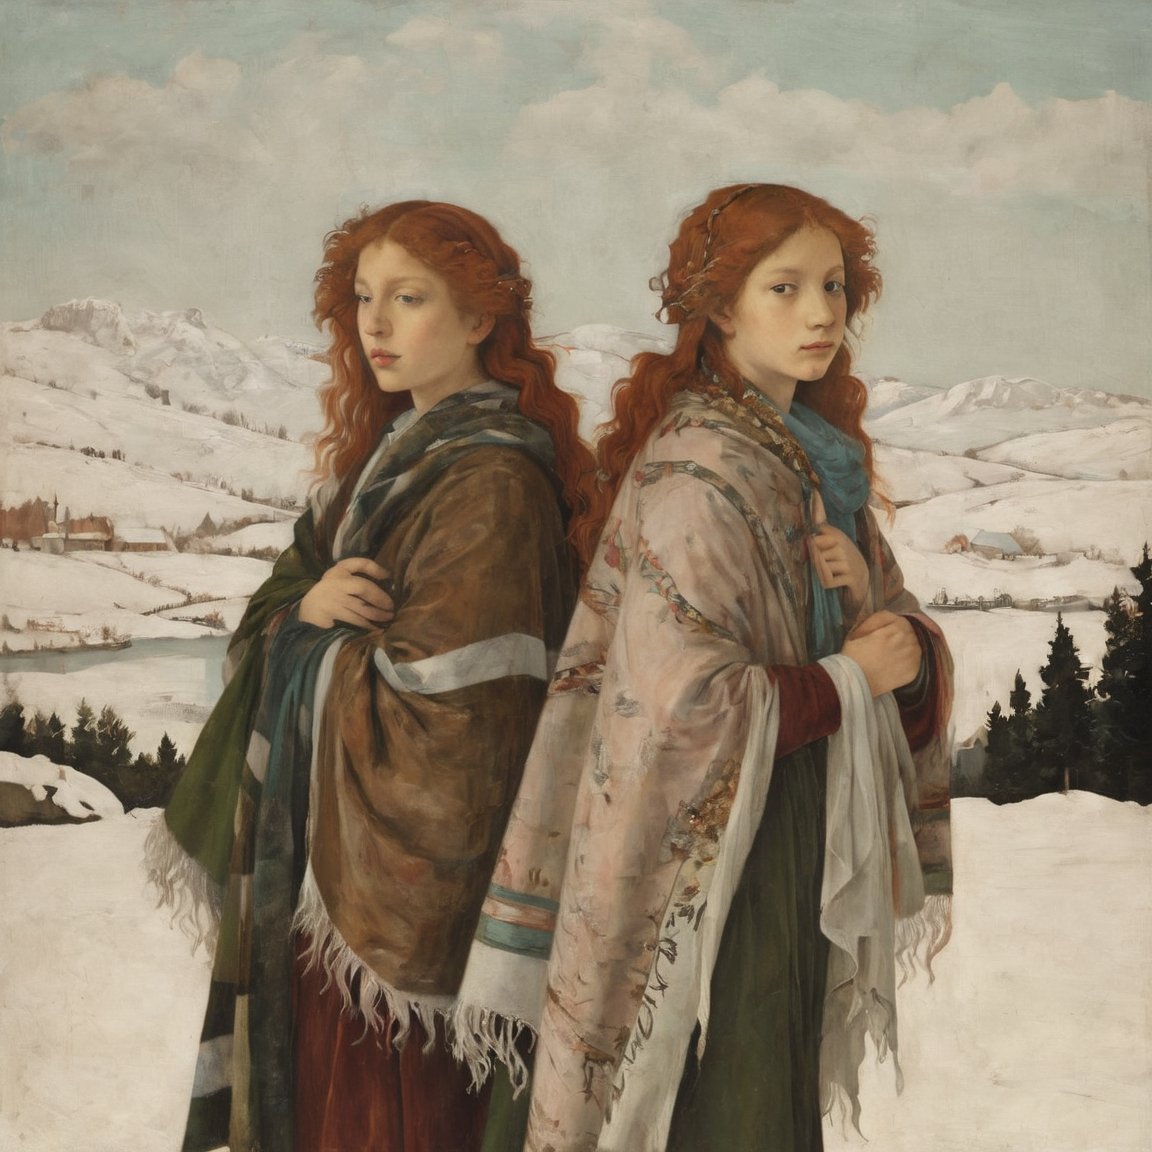 A boy and girl with copper hair in a snowy landscape with a tattered shawls by Sandro Botticelli